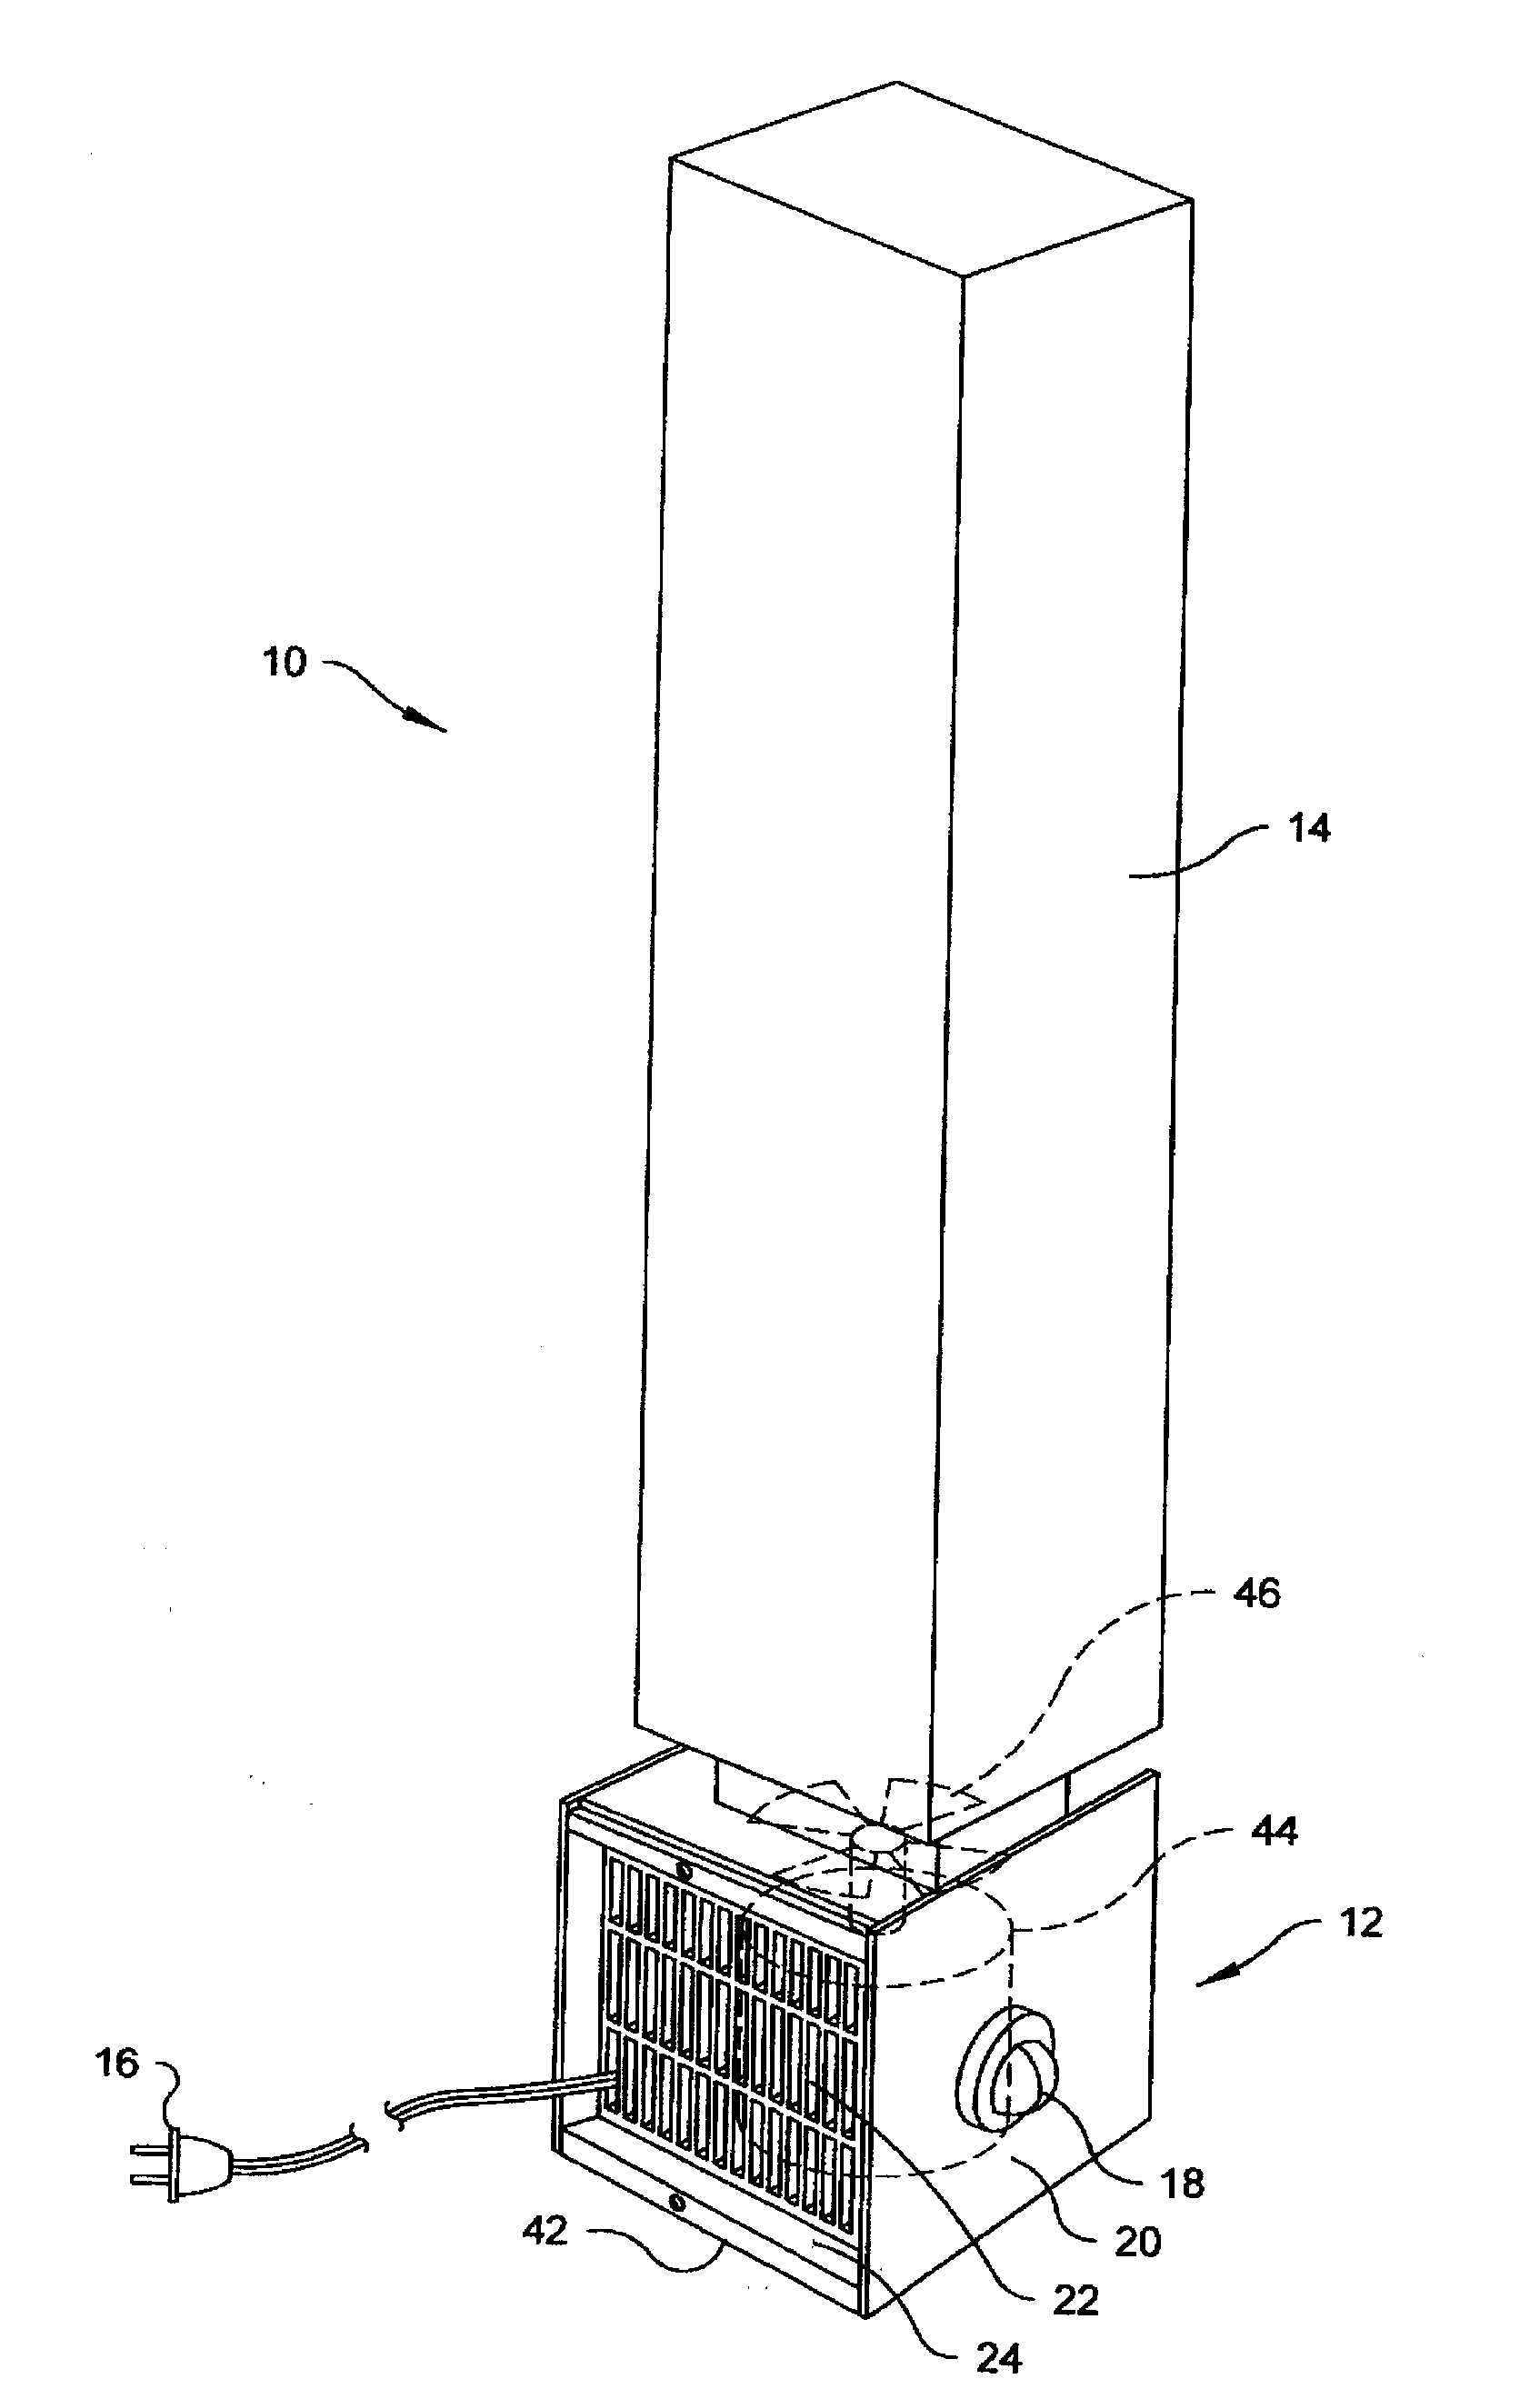 Air purifier for removing particles or contaminants from air